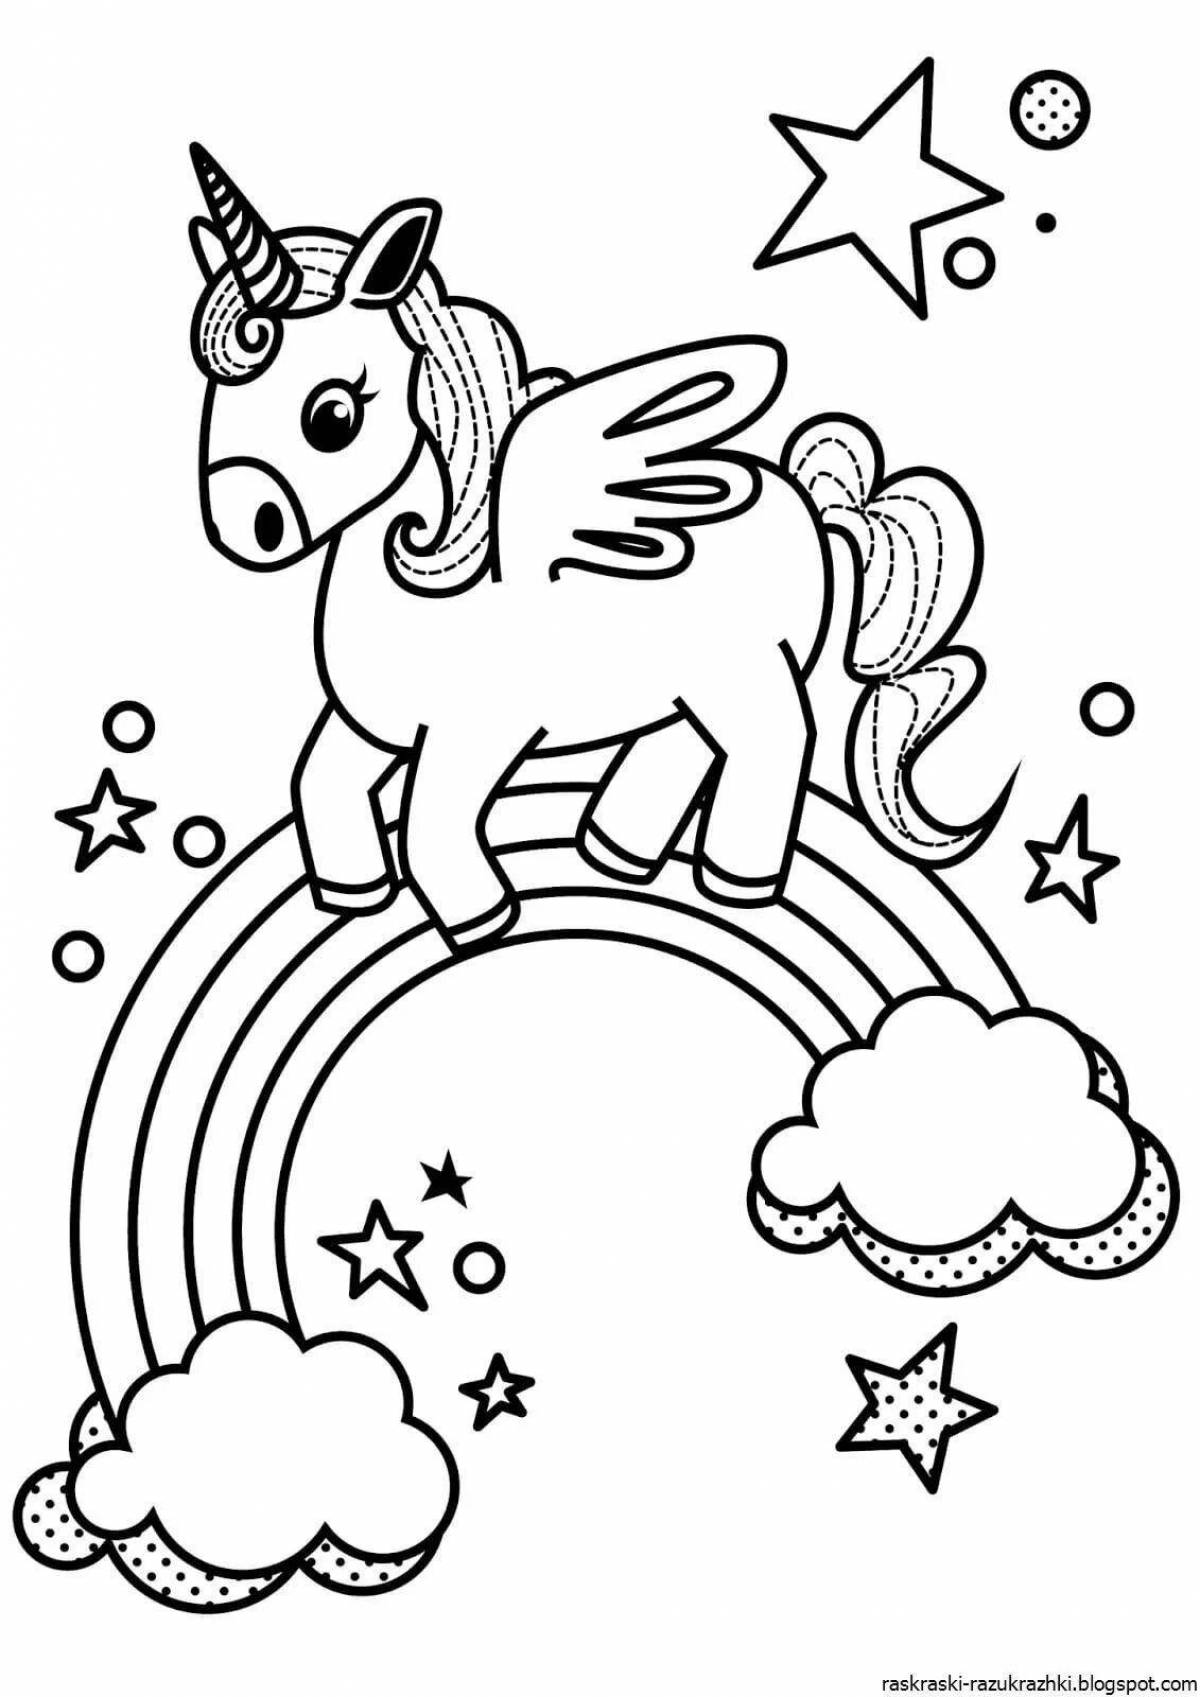 Whimsical coloring book for 5-6 year olds for girls unicorns